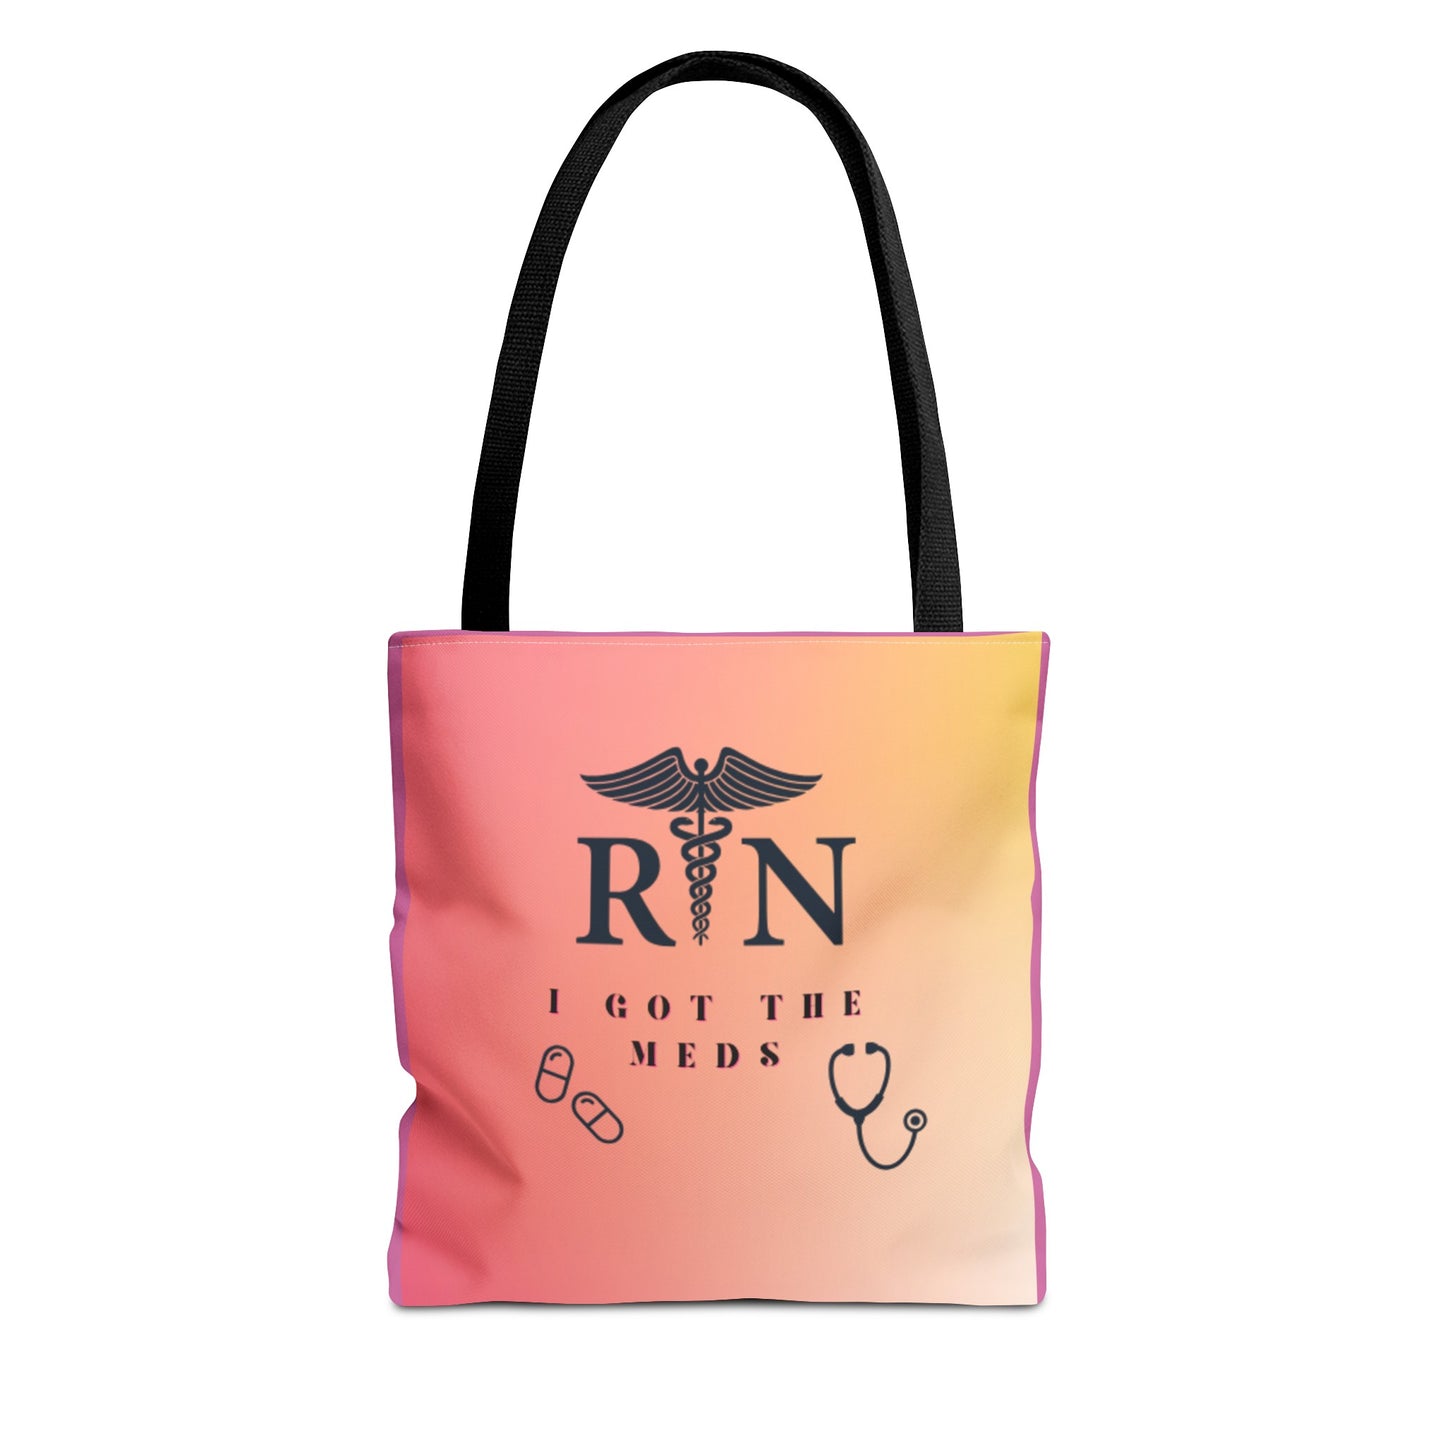 R.N.- Tote Bag with RN Credentials